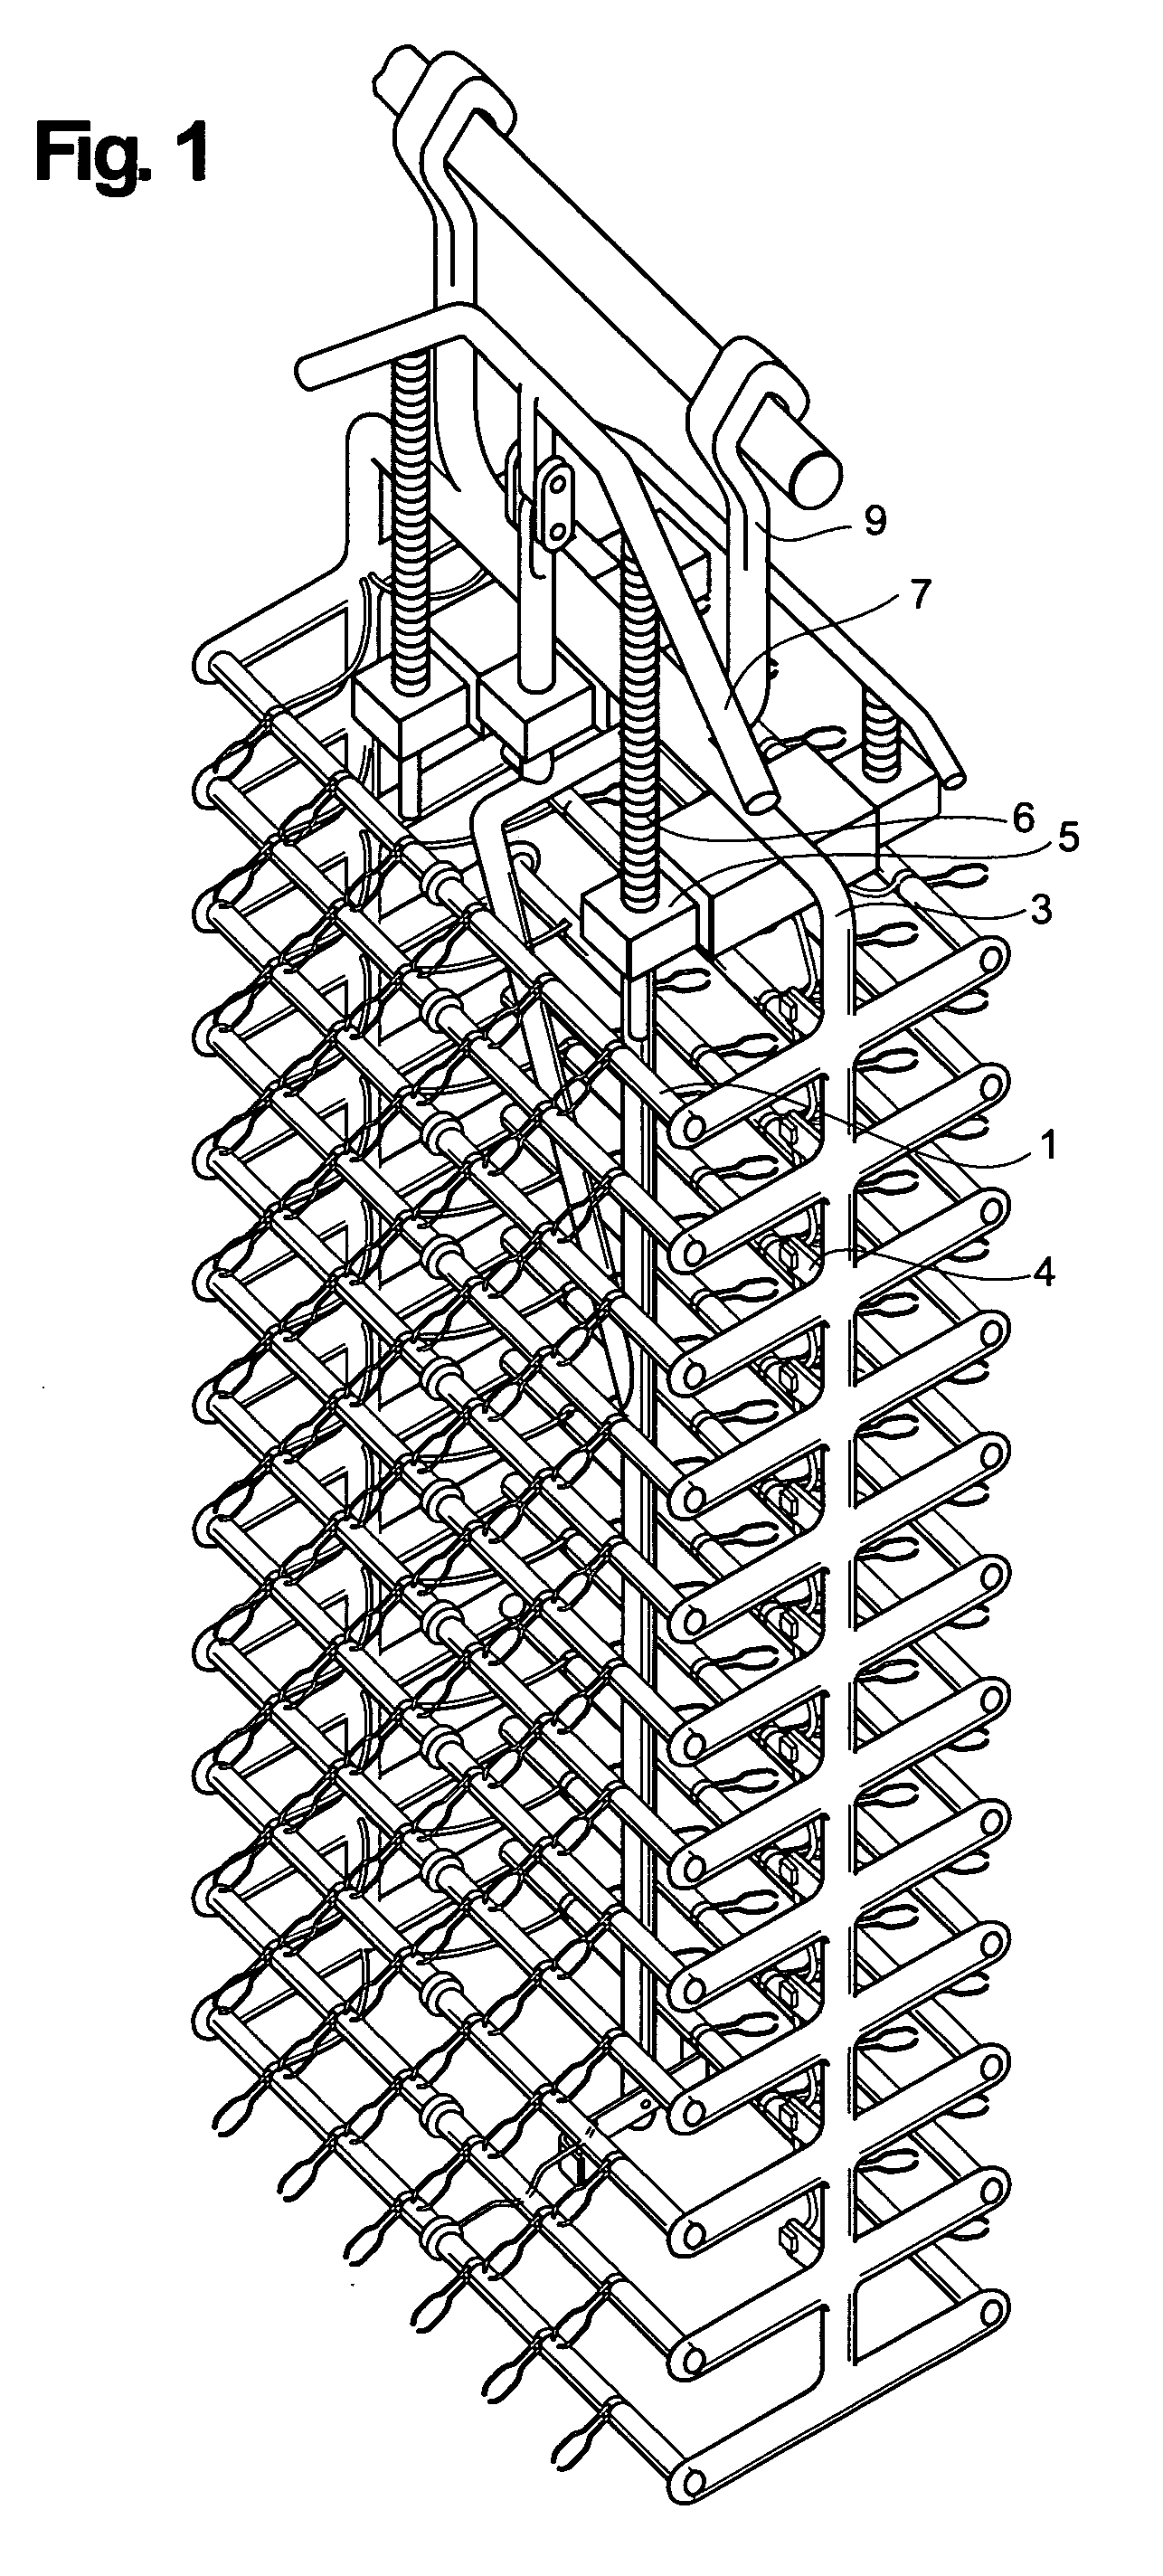 Method and apparatus for plating metal parts